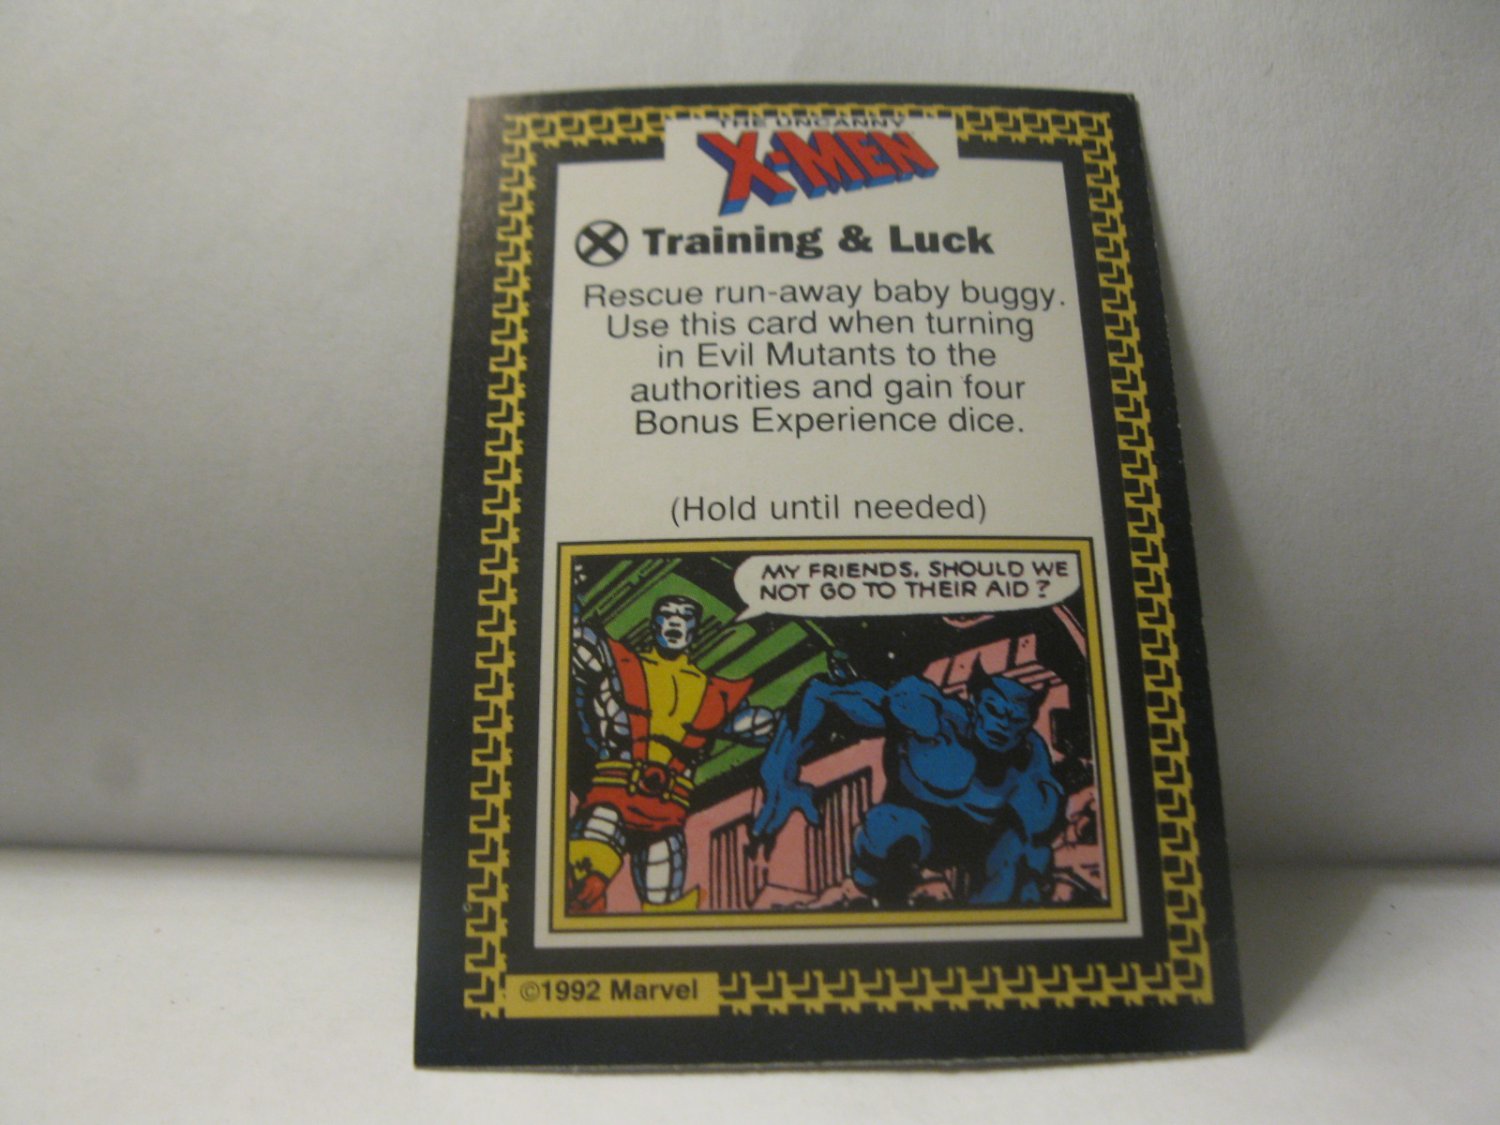 1992 Uncanny X-Men Alert! Board Game Piece: Training & Luck Card- Rescue Baby Buggy